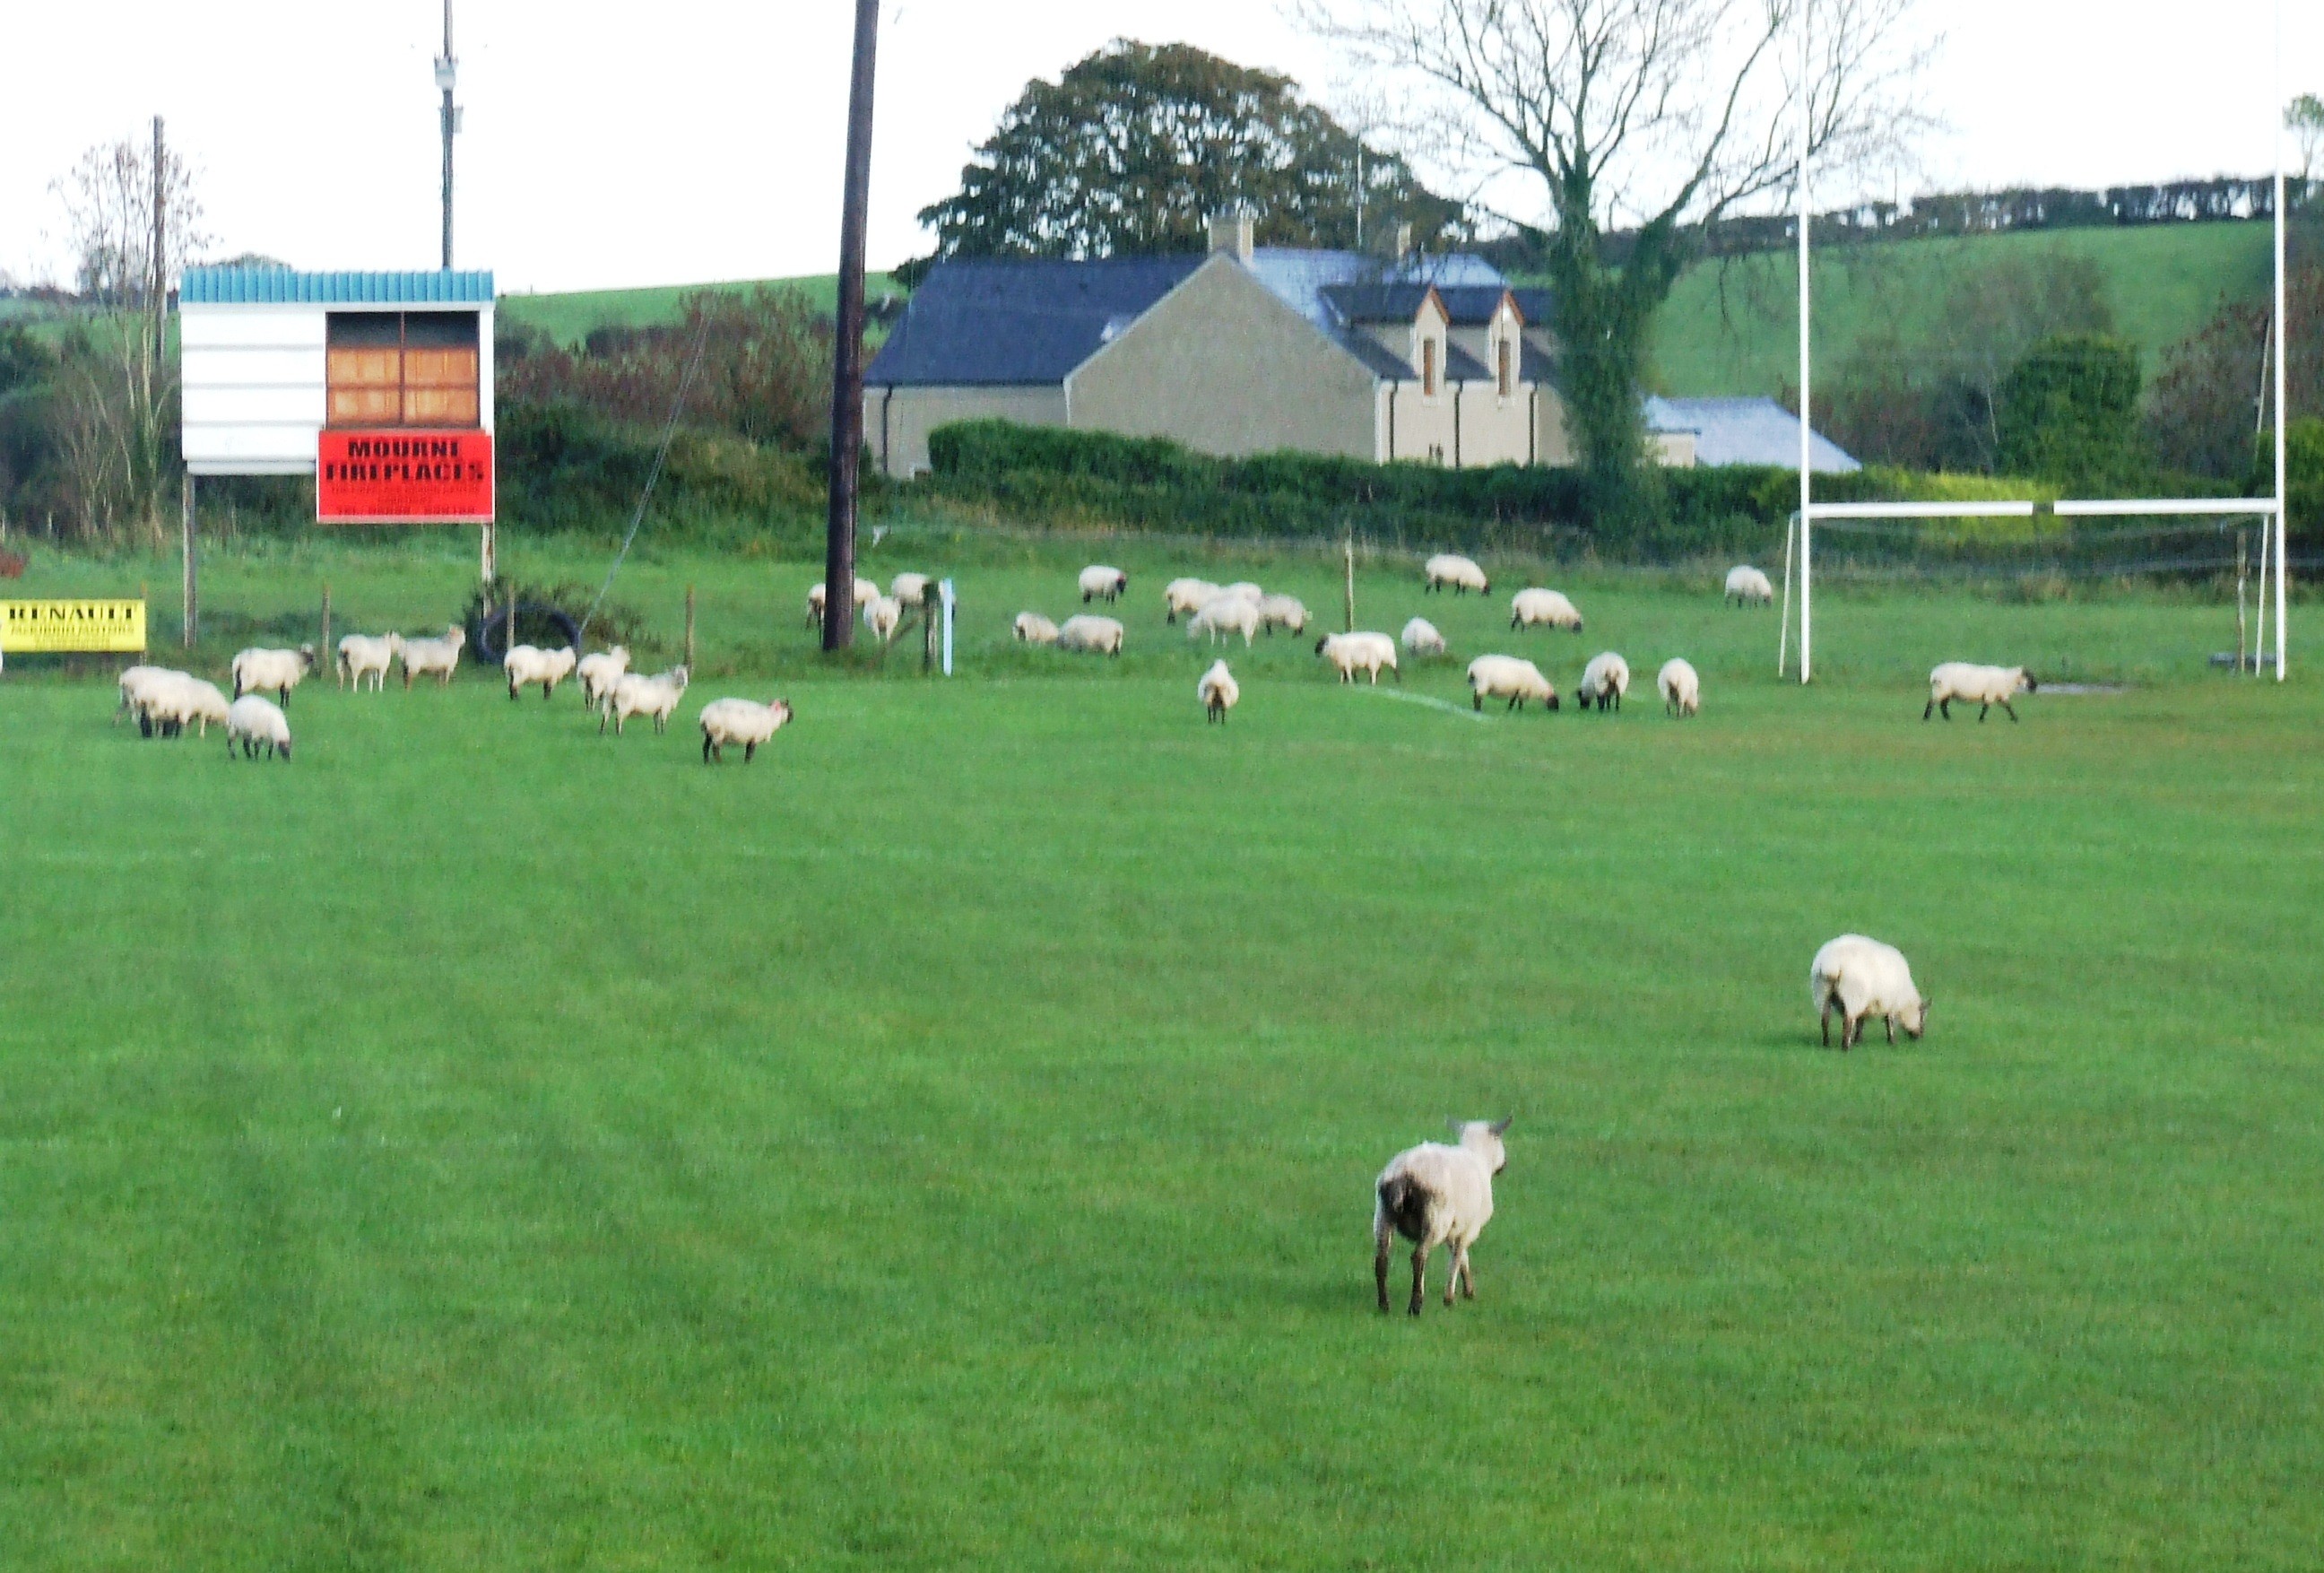 Sheep graze in Loughinisland GAC's playing field in 2008. This was a common sight at GAA pitches around the country in the past.